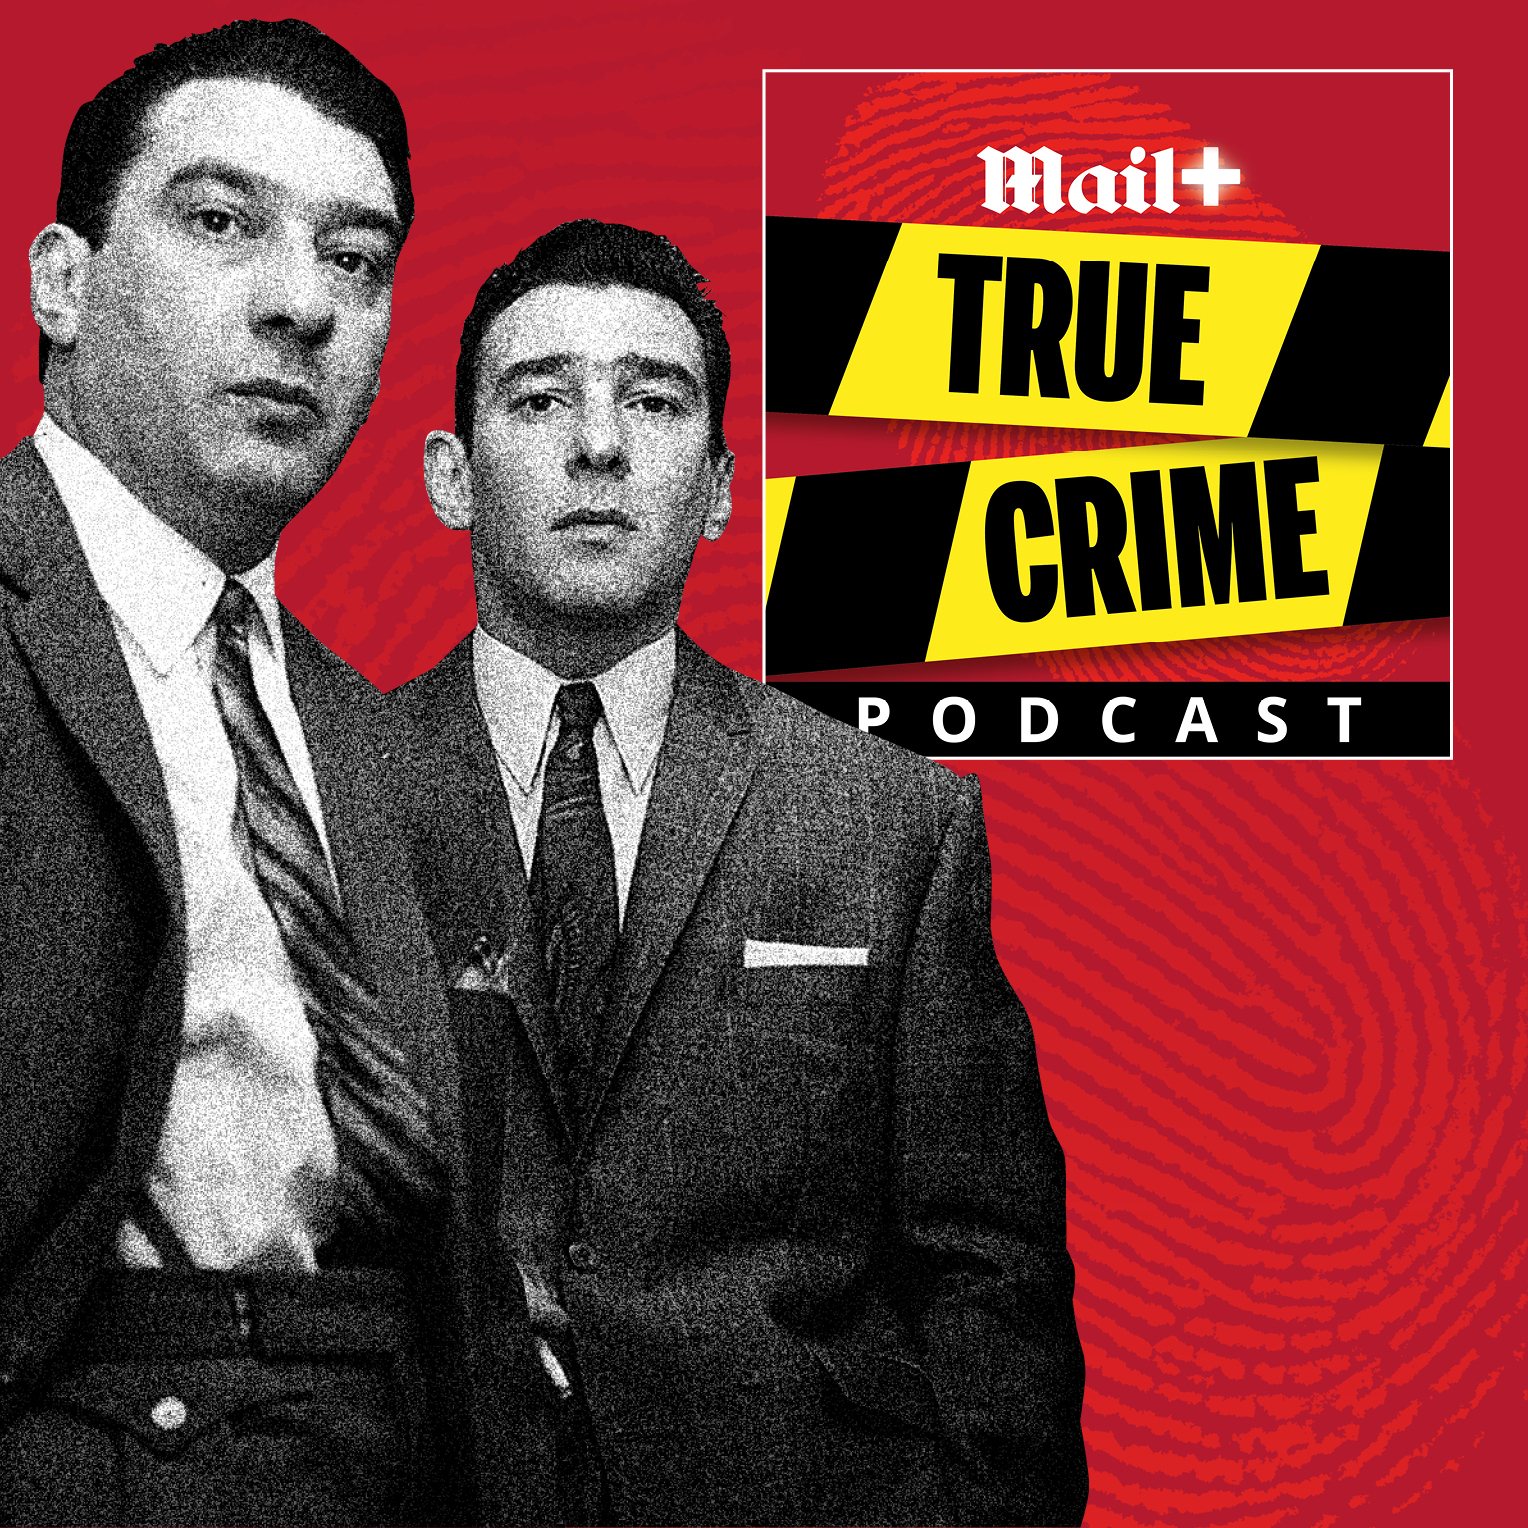 The night the Krays moved into my house (after shooting dead a rival gangster)